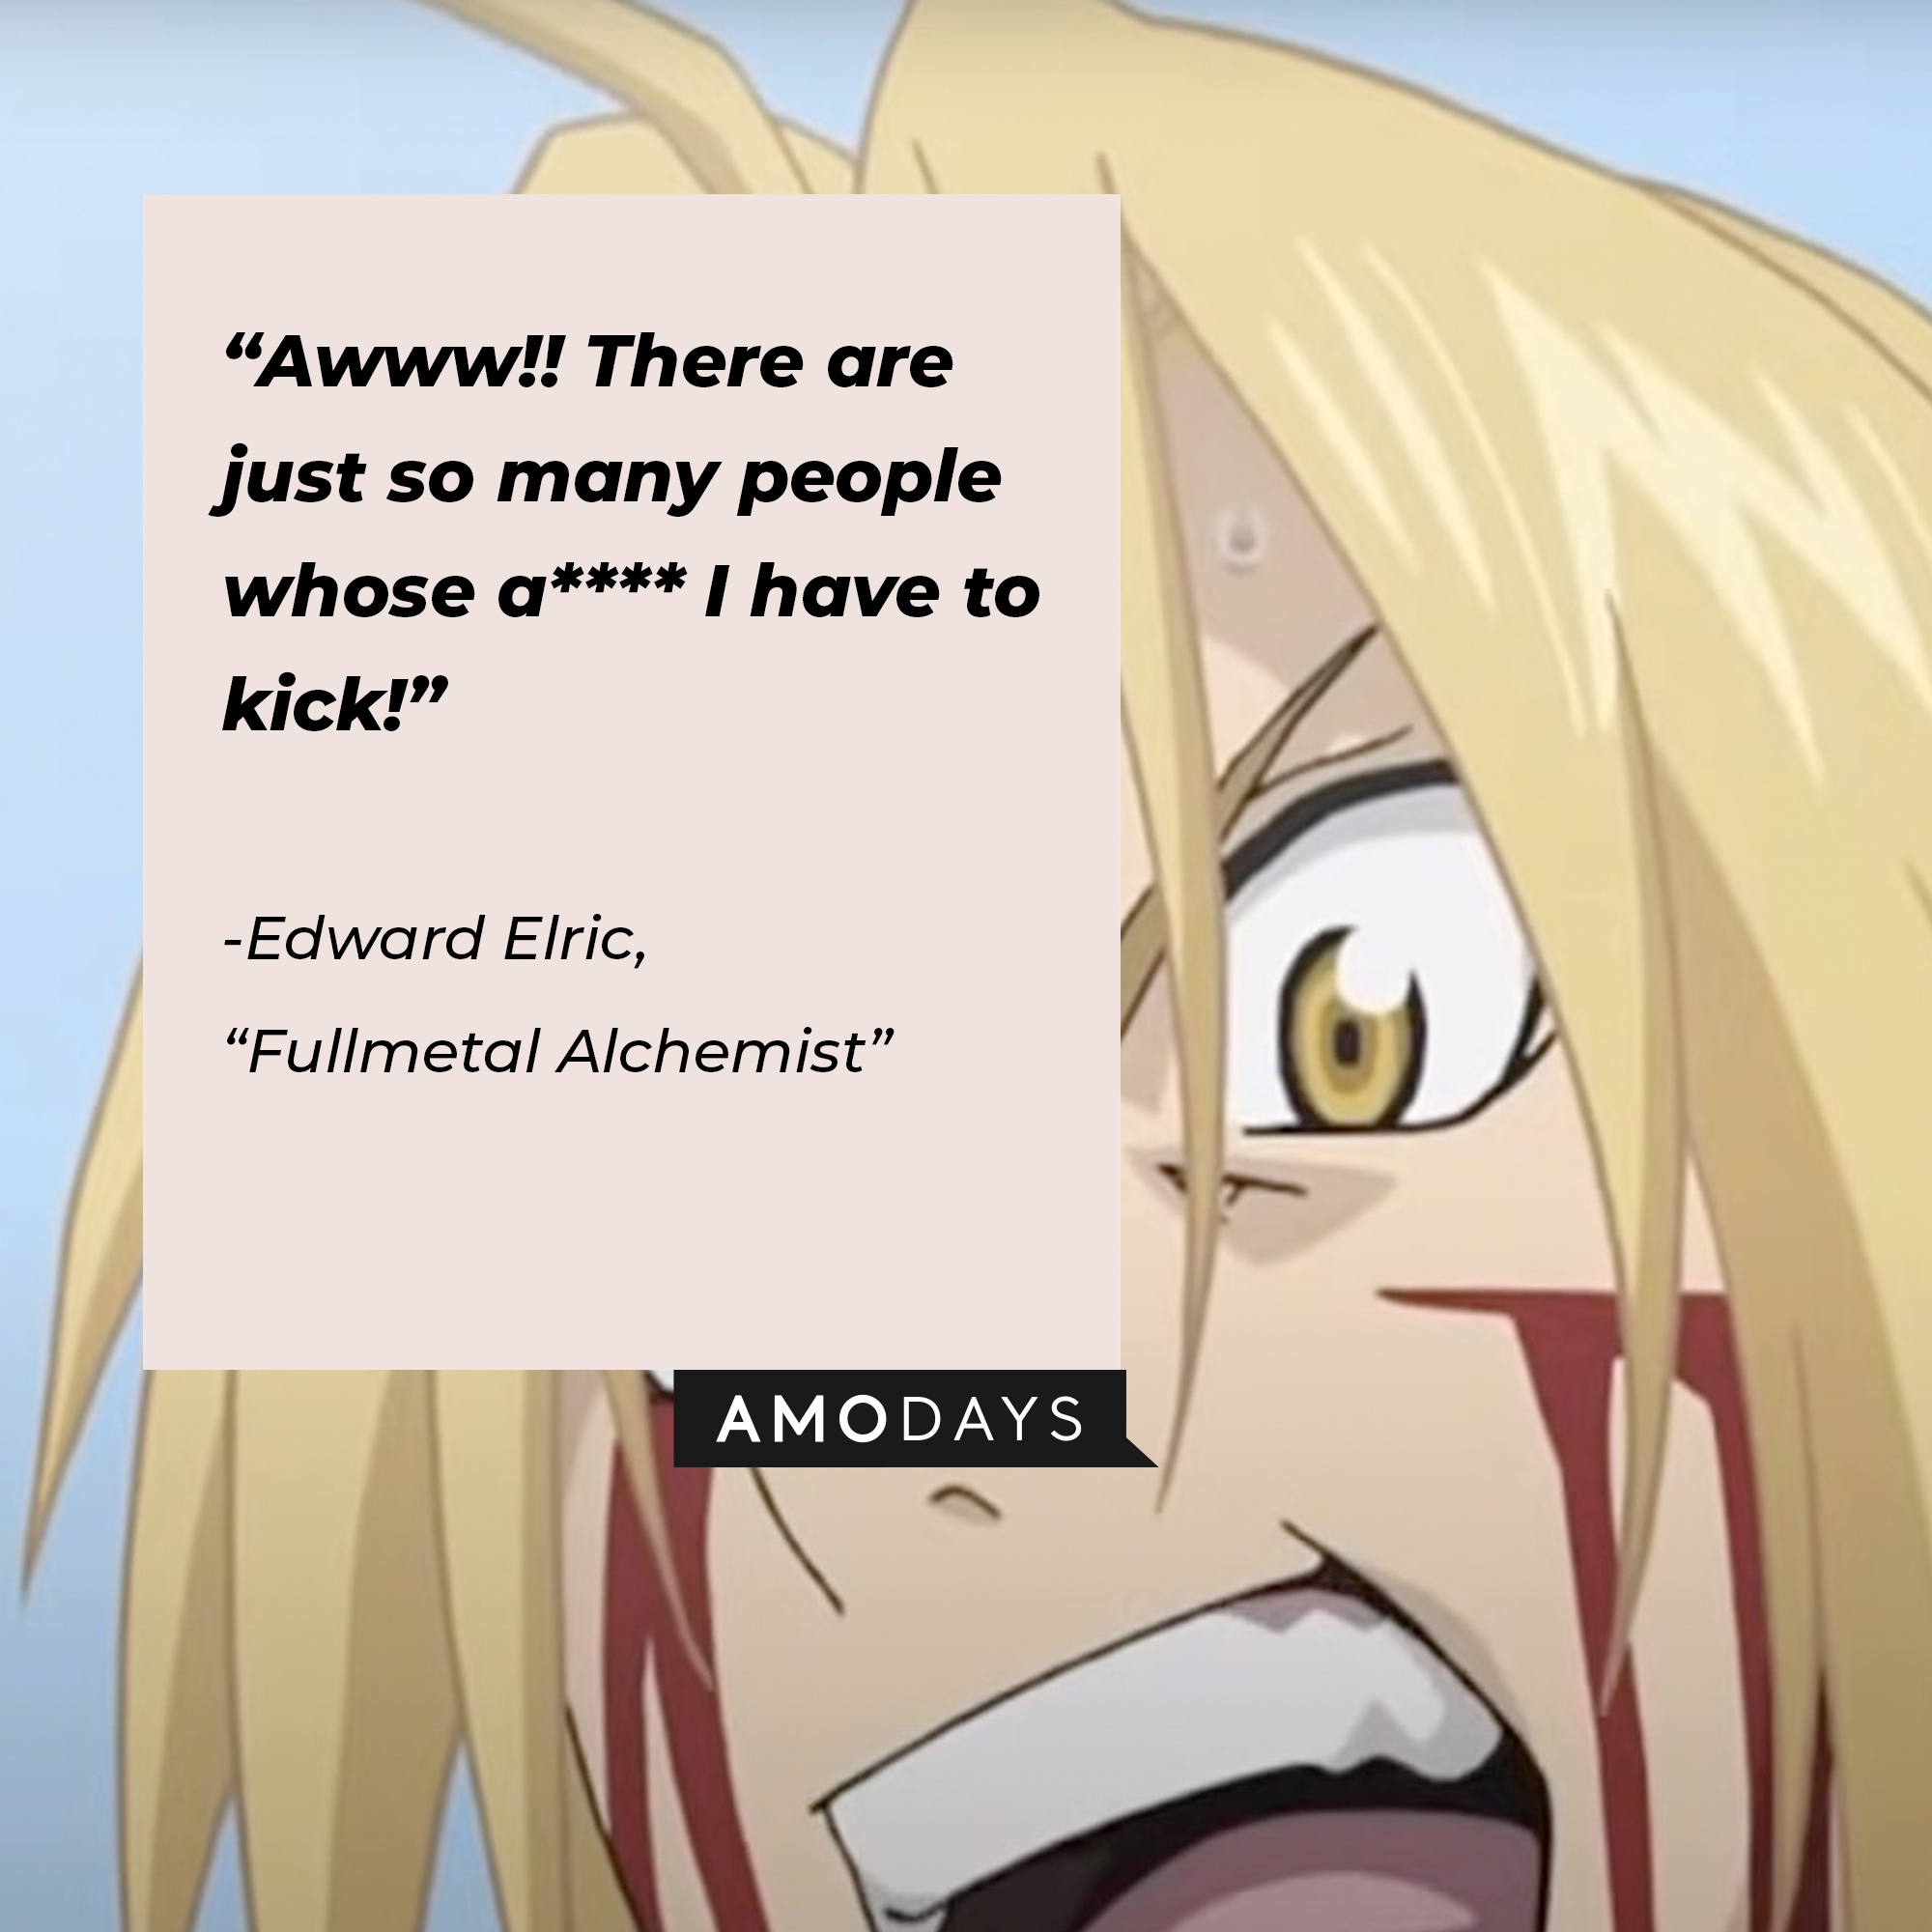 Edward Elric's quote: “Awww!! There are just so many people whose a**** I have to kick!” | Image: facebook.com/FMAHiromuArakawa